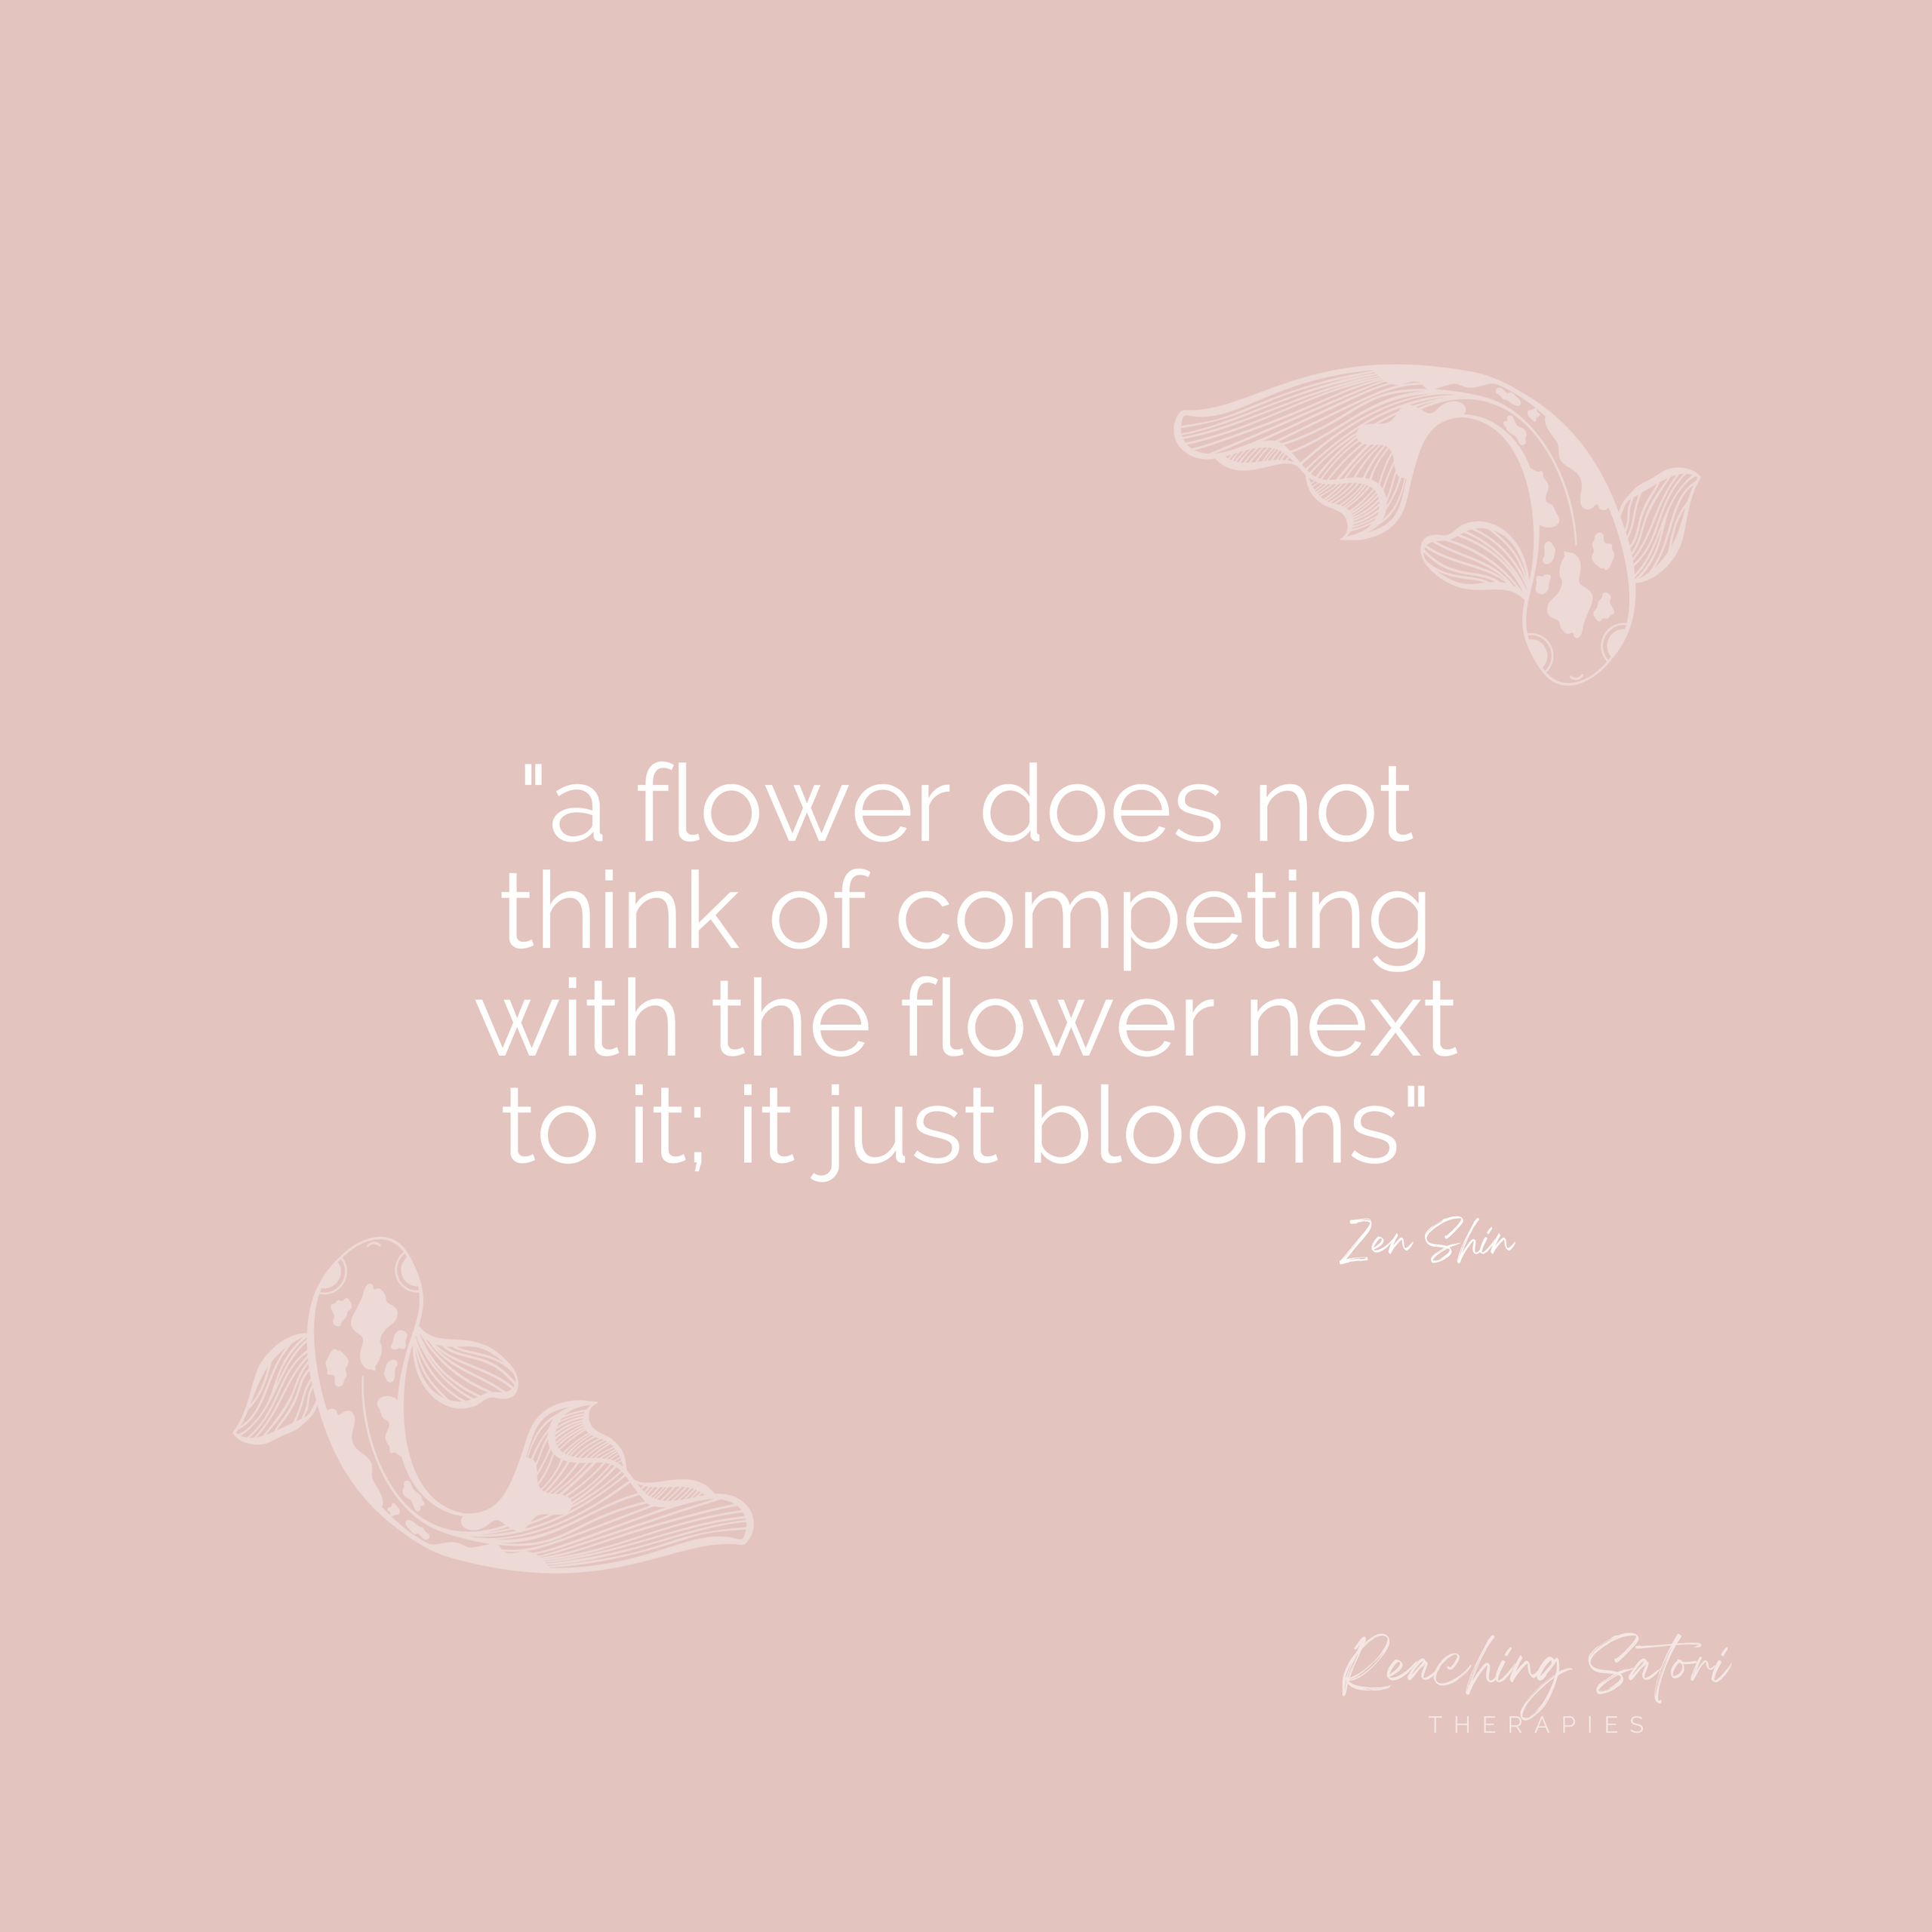 "a flower does not think of competing with the flower next to it; it just blooms"